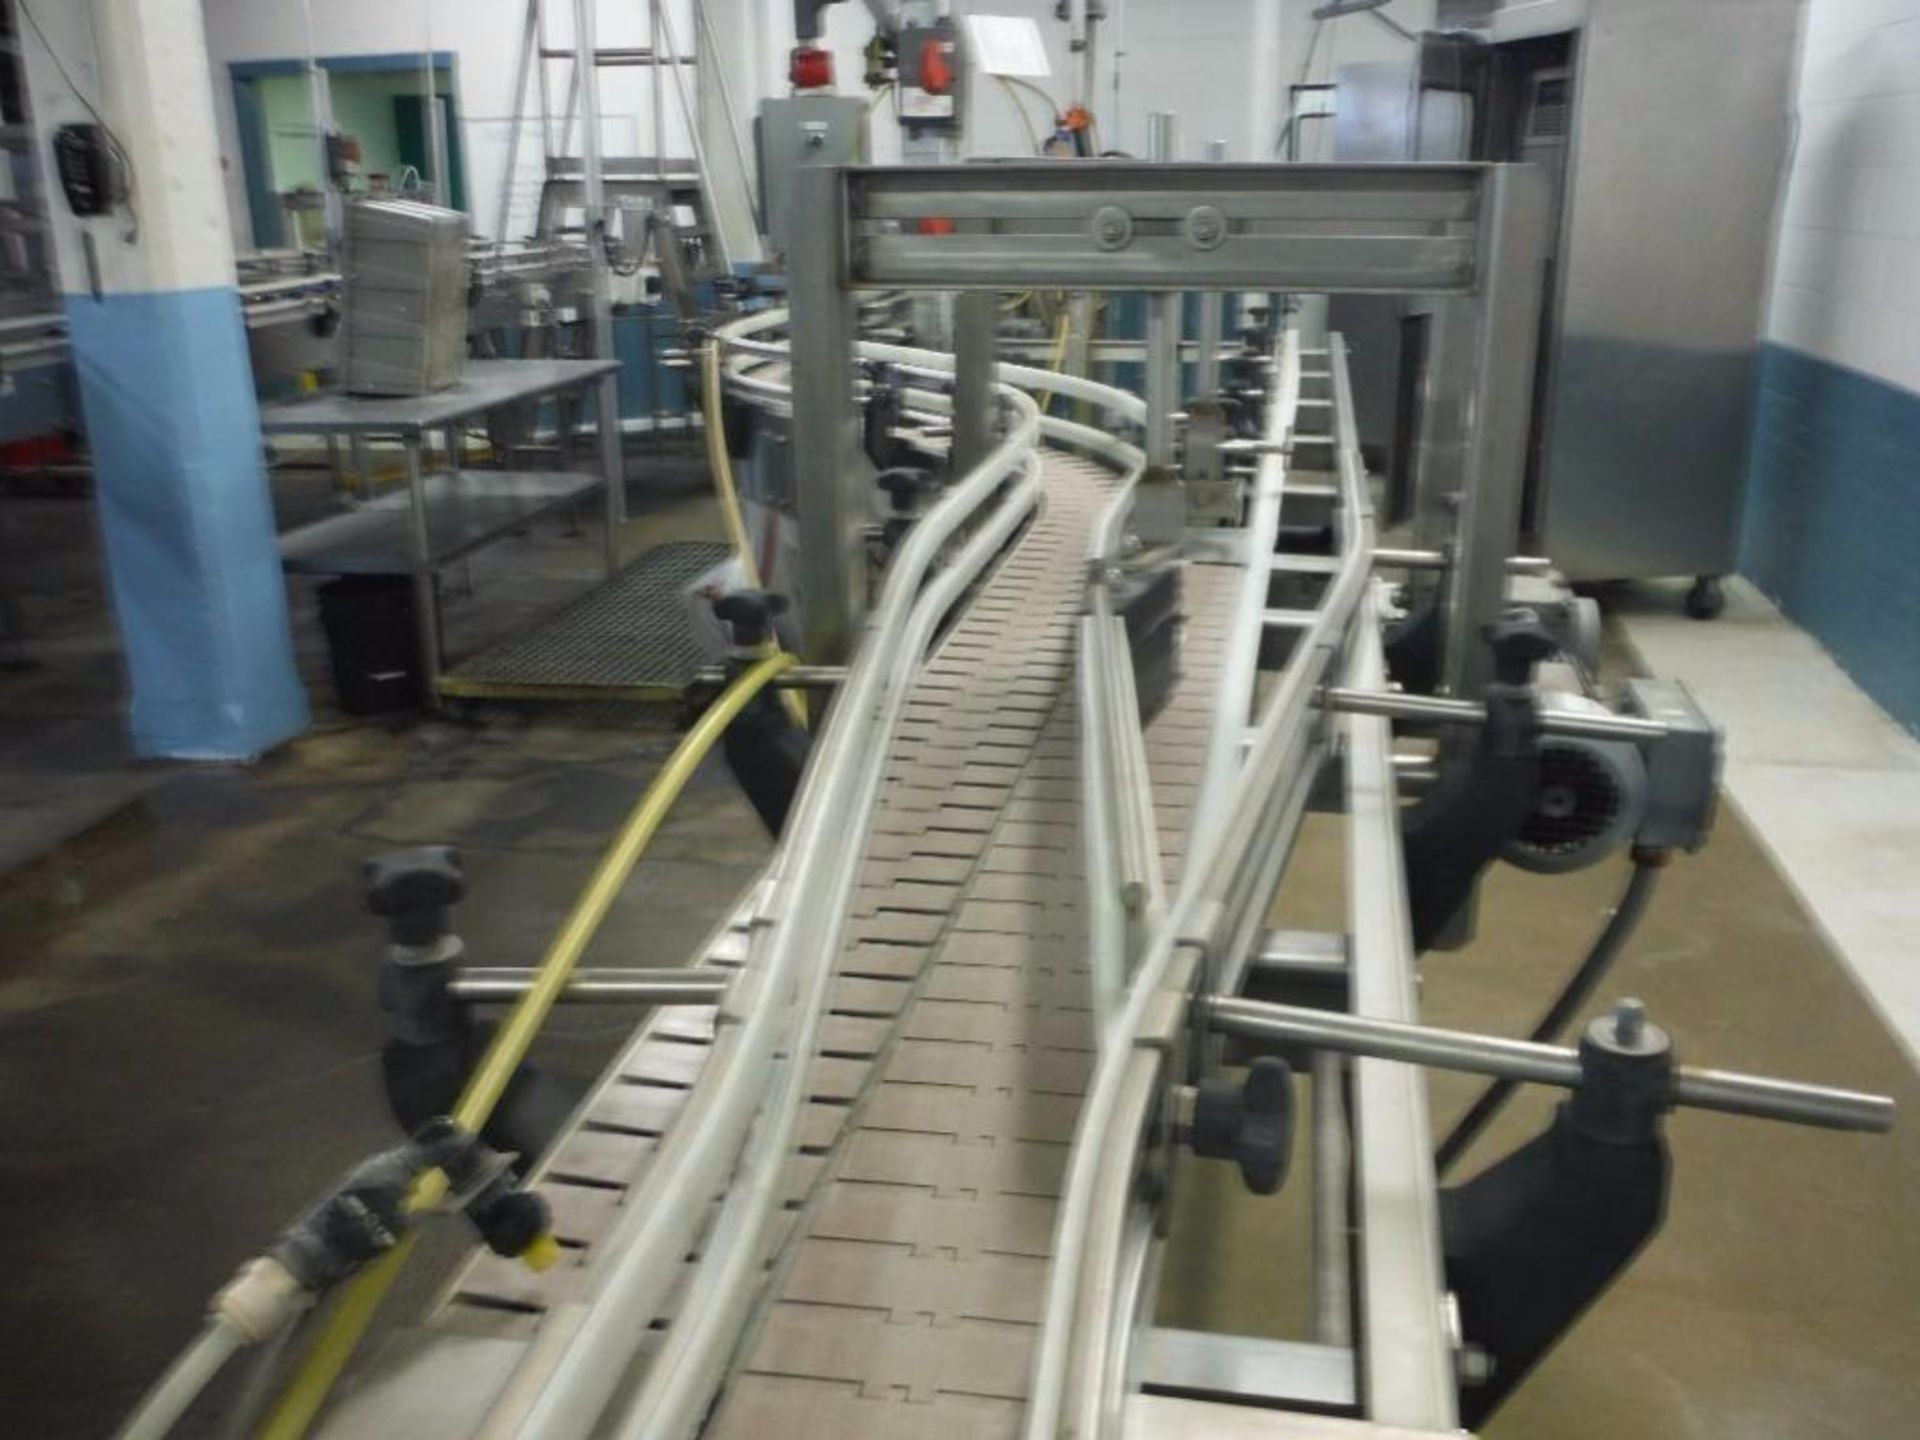 Priority One S.S. Table Top Power Conveyor, 22ft x 4 1/2in x 45in tall incomplete with No belt - Image 2 of 4